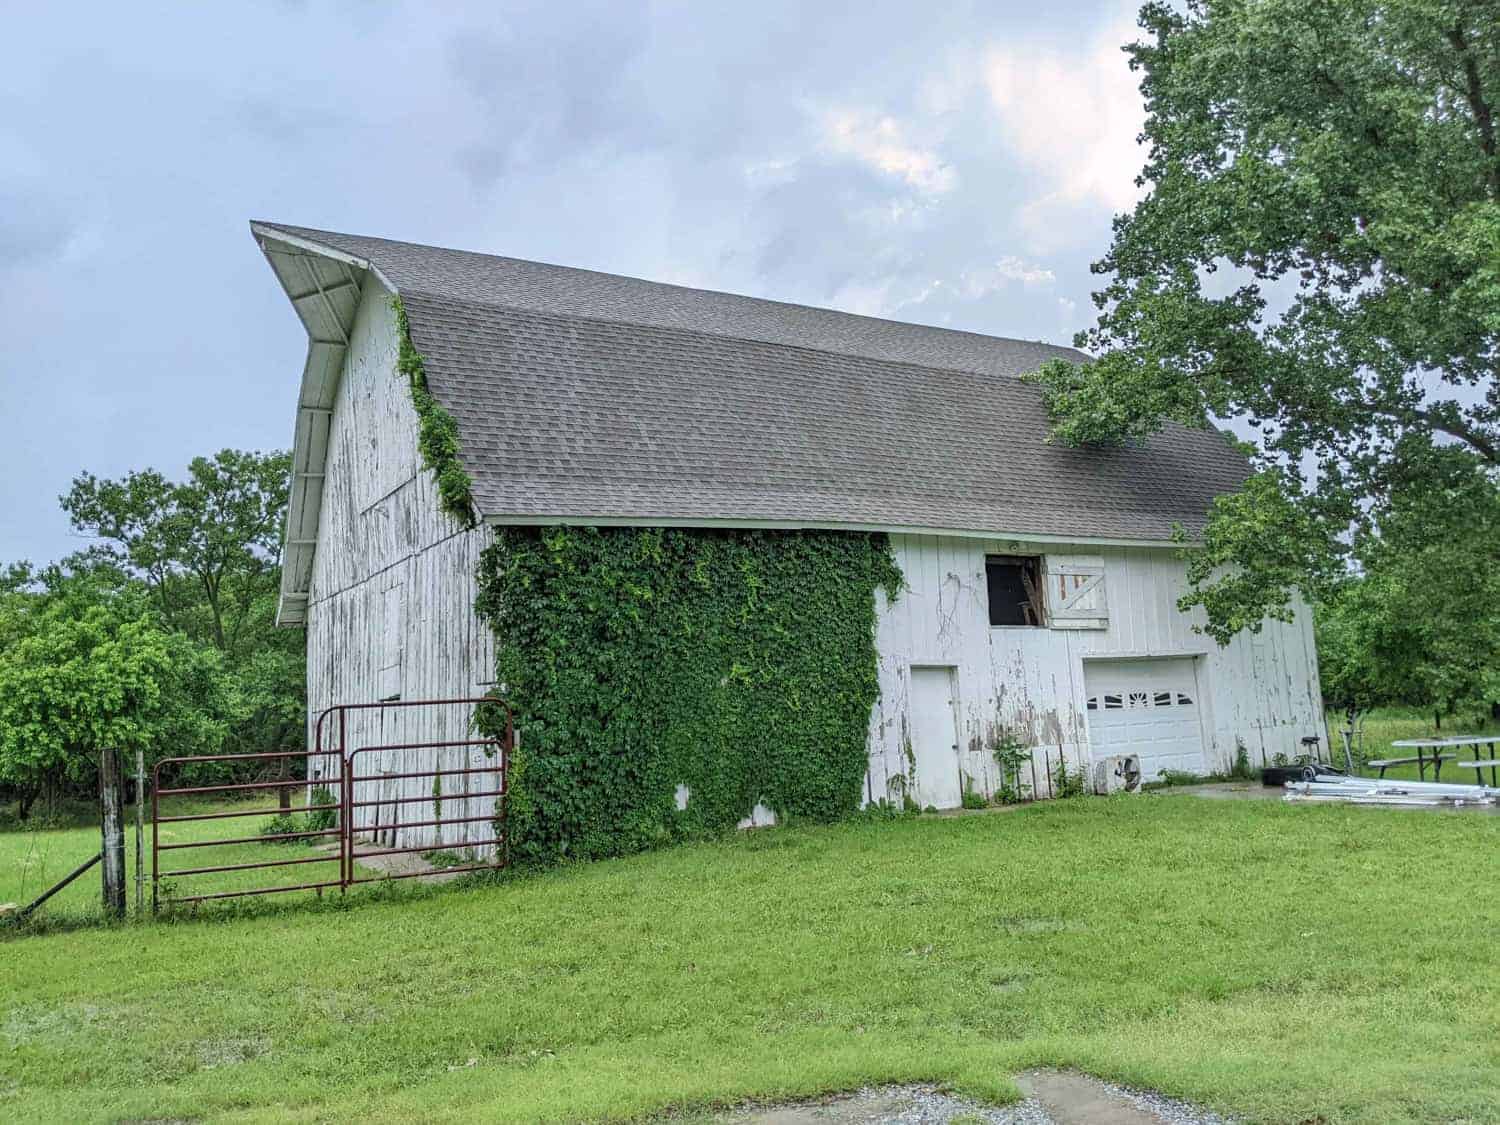 vintage white farm barn with green vines growing up the side